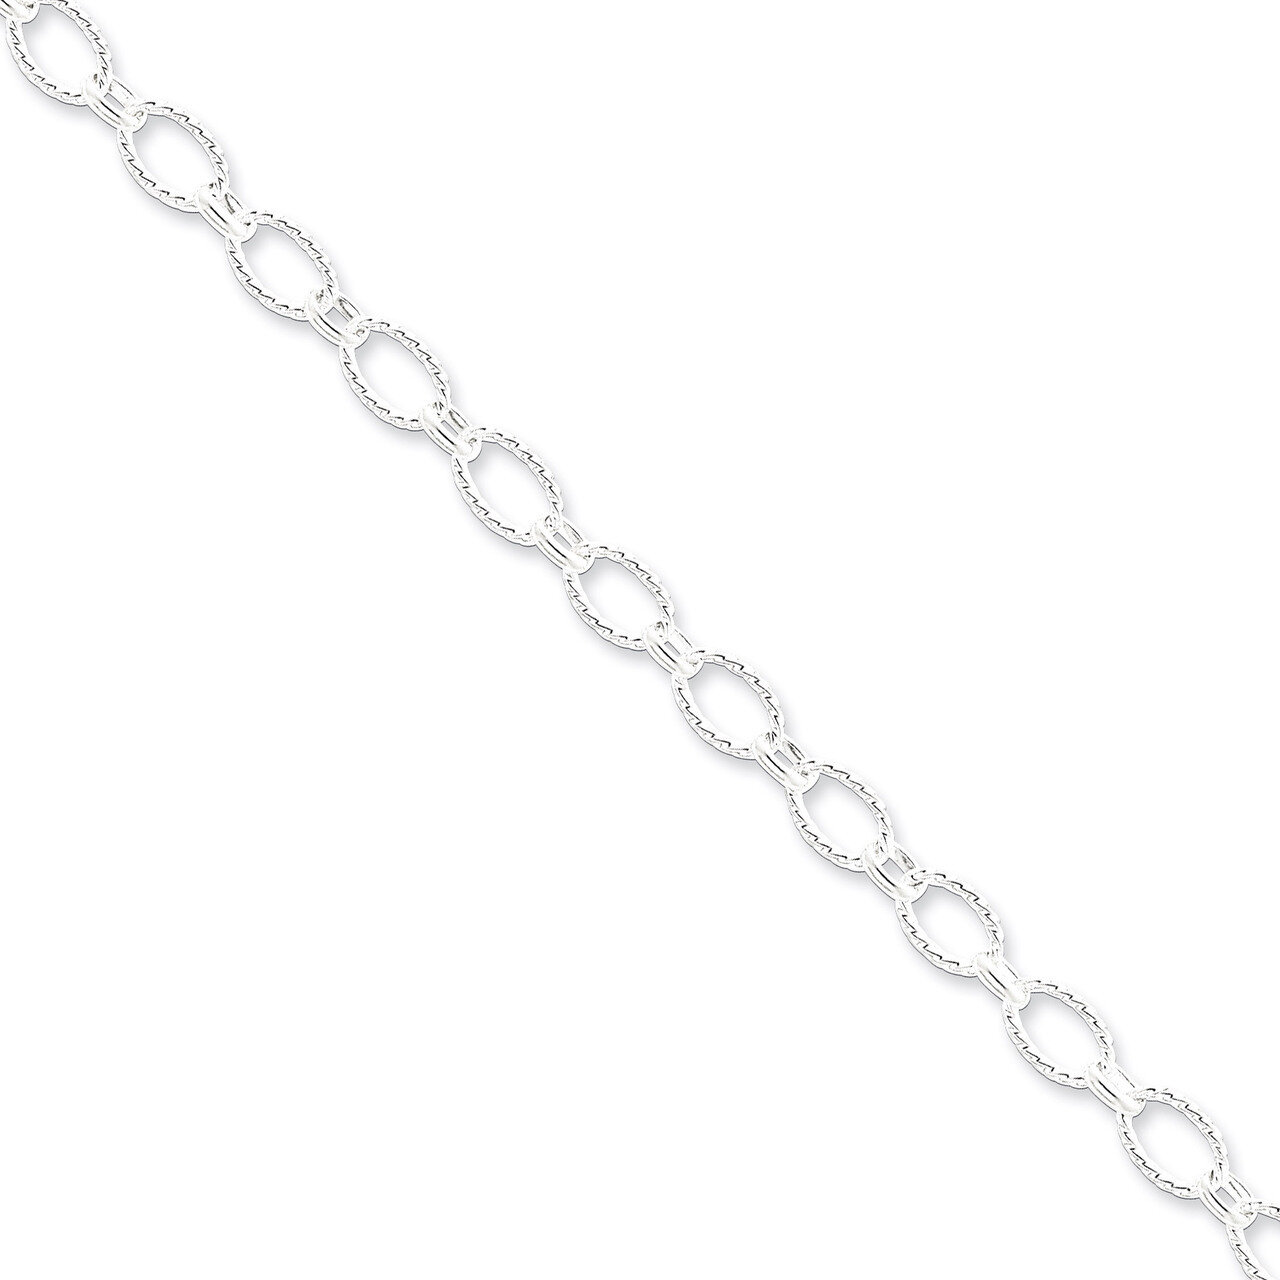 20 Inch Necklace Sterling Silver Fancy QFC92-20